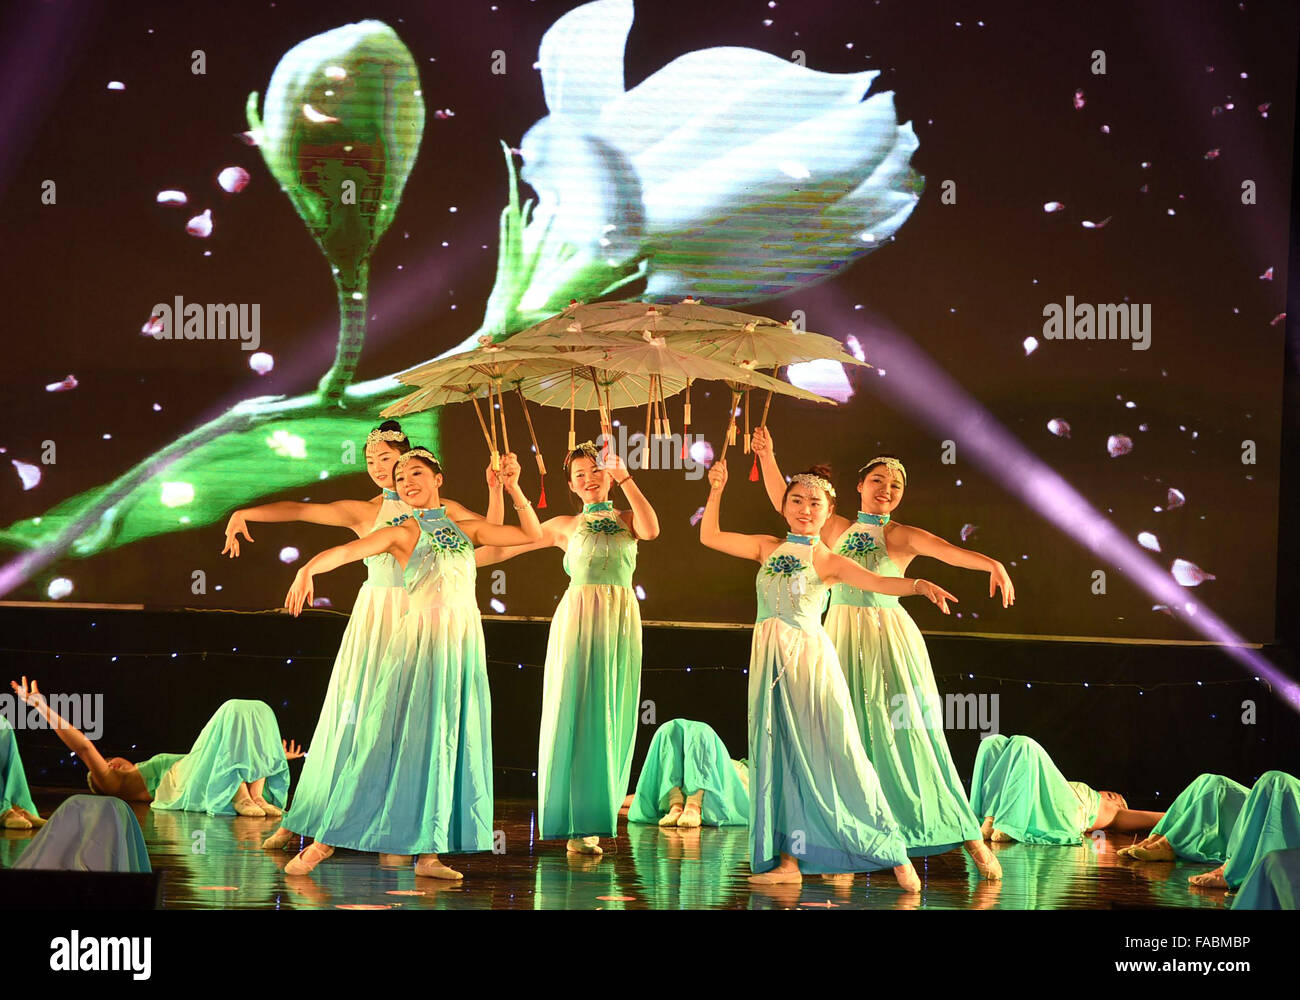 Bozhou. 26th Dec, 2015. Dancers perform during a theatrical performance held in Bozhou, east China's Anhui Province, Dec. 26, 2015 The theatrical performance was held to celebrate the upcoming New Year. Credit:  Liu Qinli/Xinhua/Alamy Live News Stock Photo